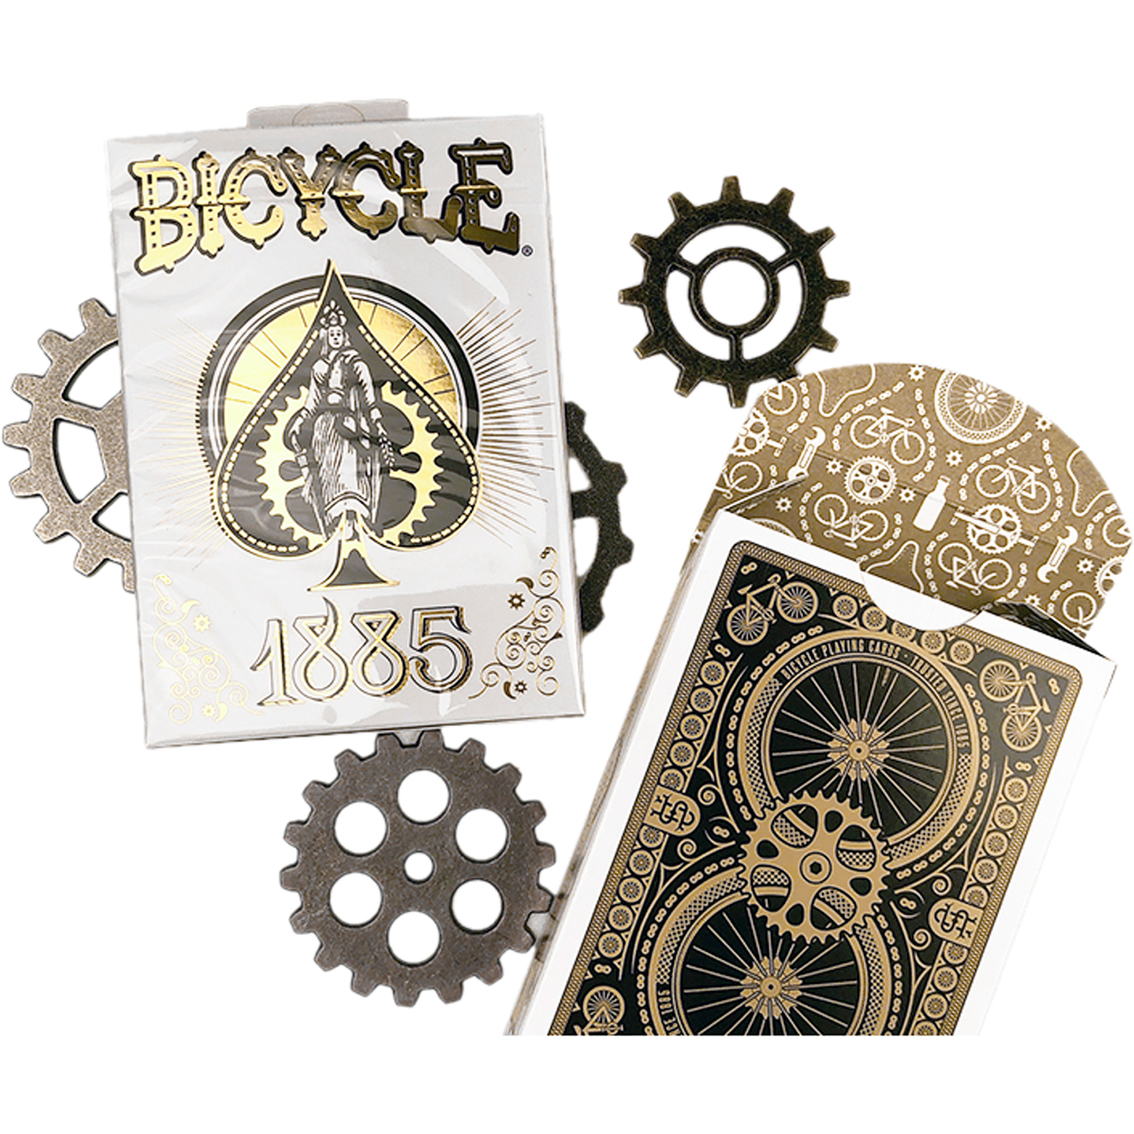 Bicycle 1885 Playing Cards - Image 3 of 6